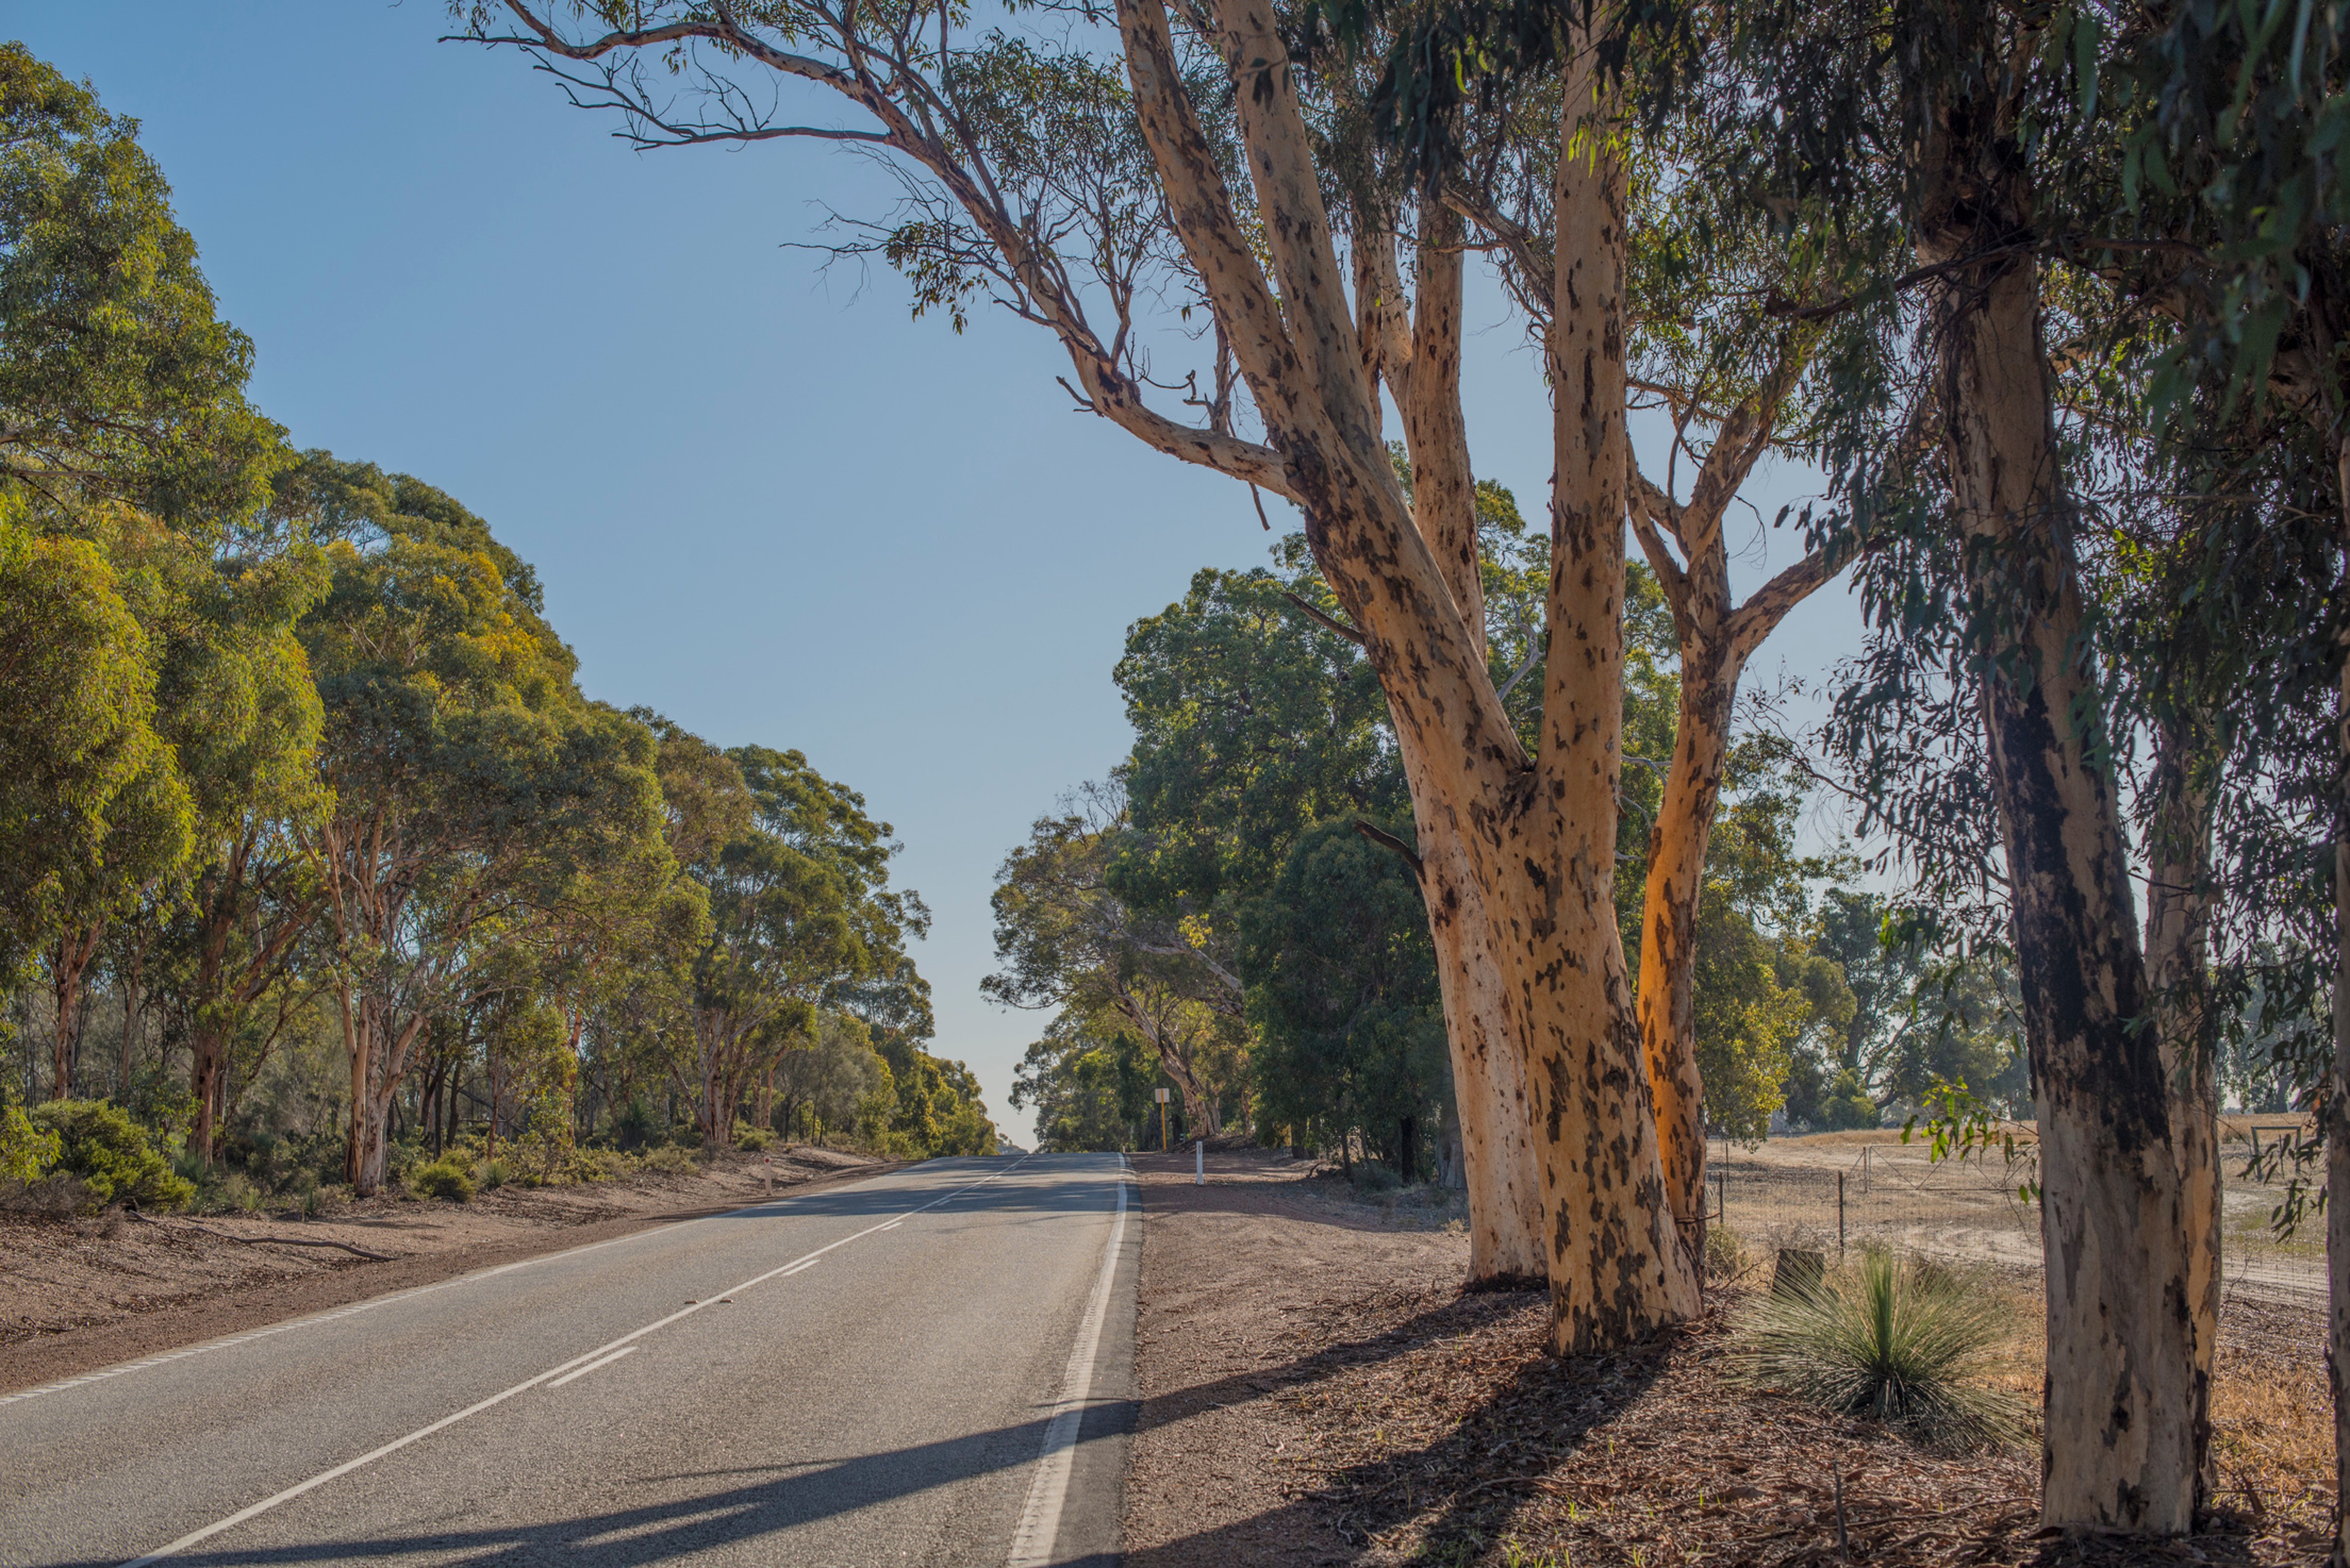 Photo of an Australian dirt road and gum tree